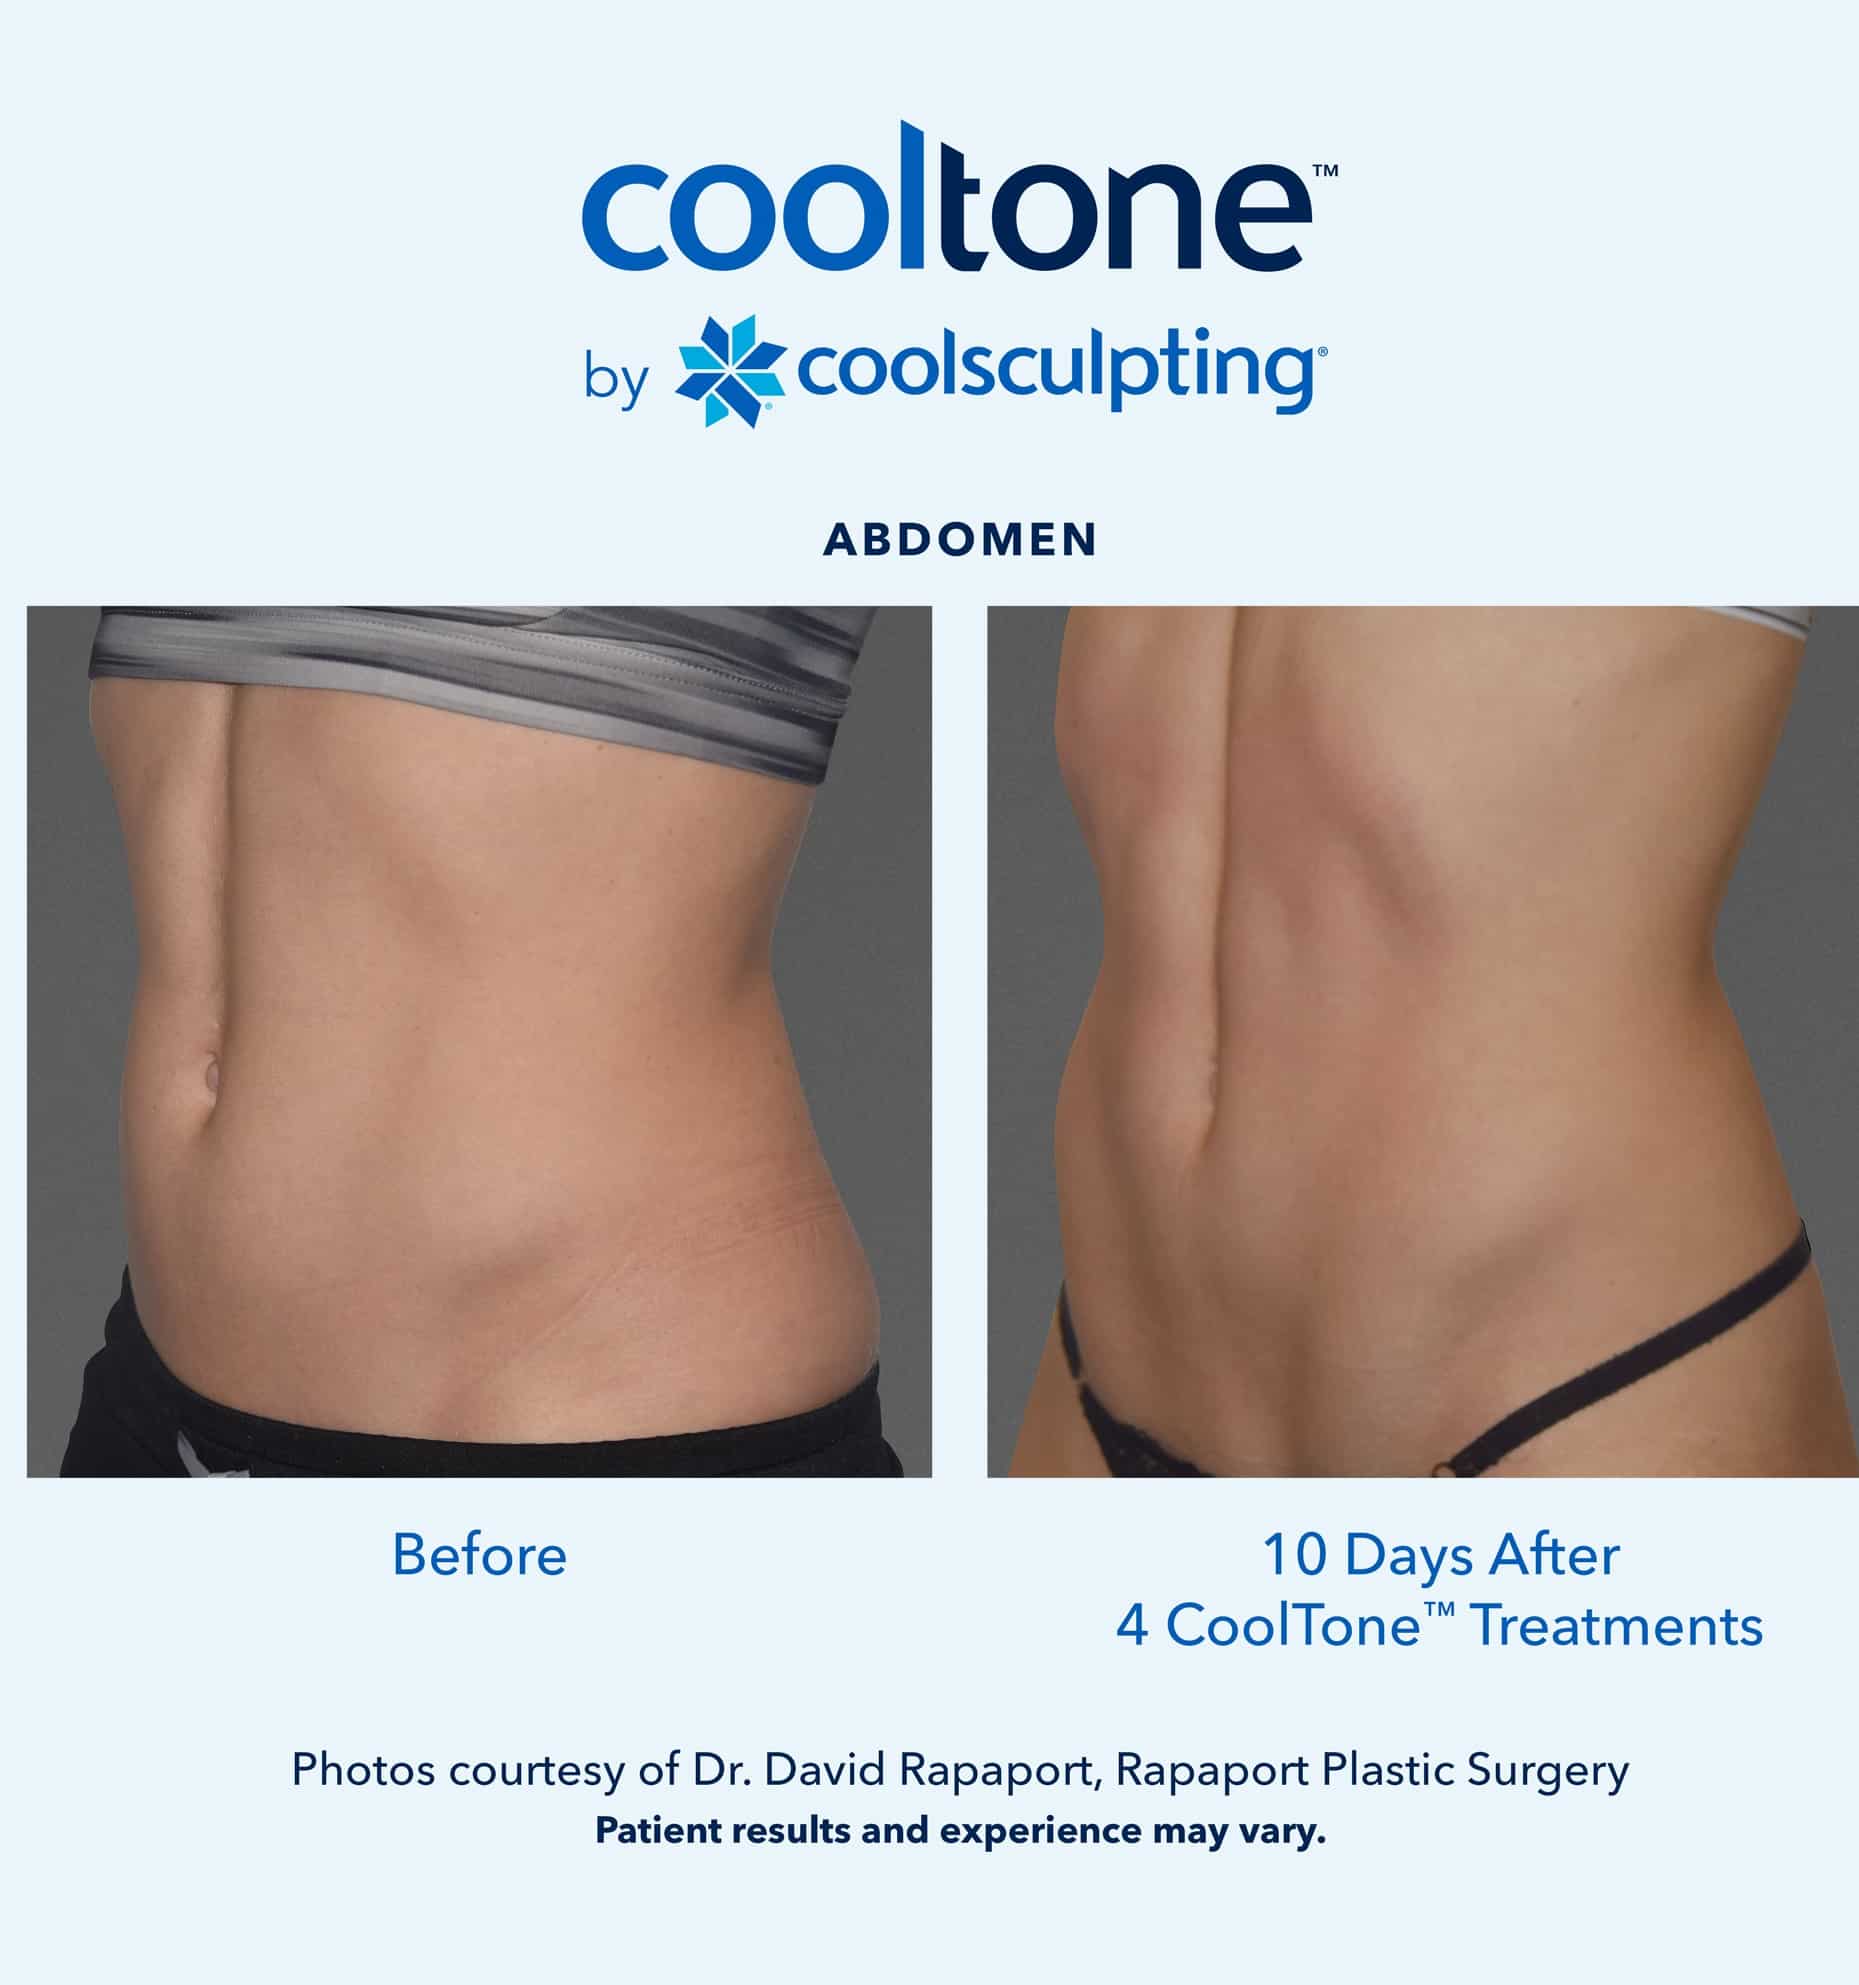 CoolSculpting & CoolTone - New Decade New You - BLUME